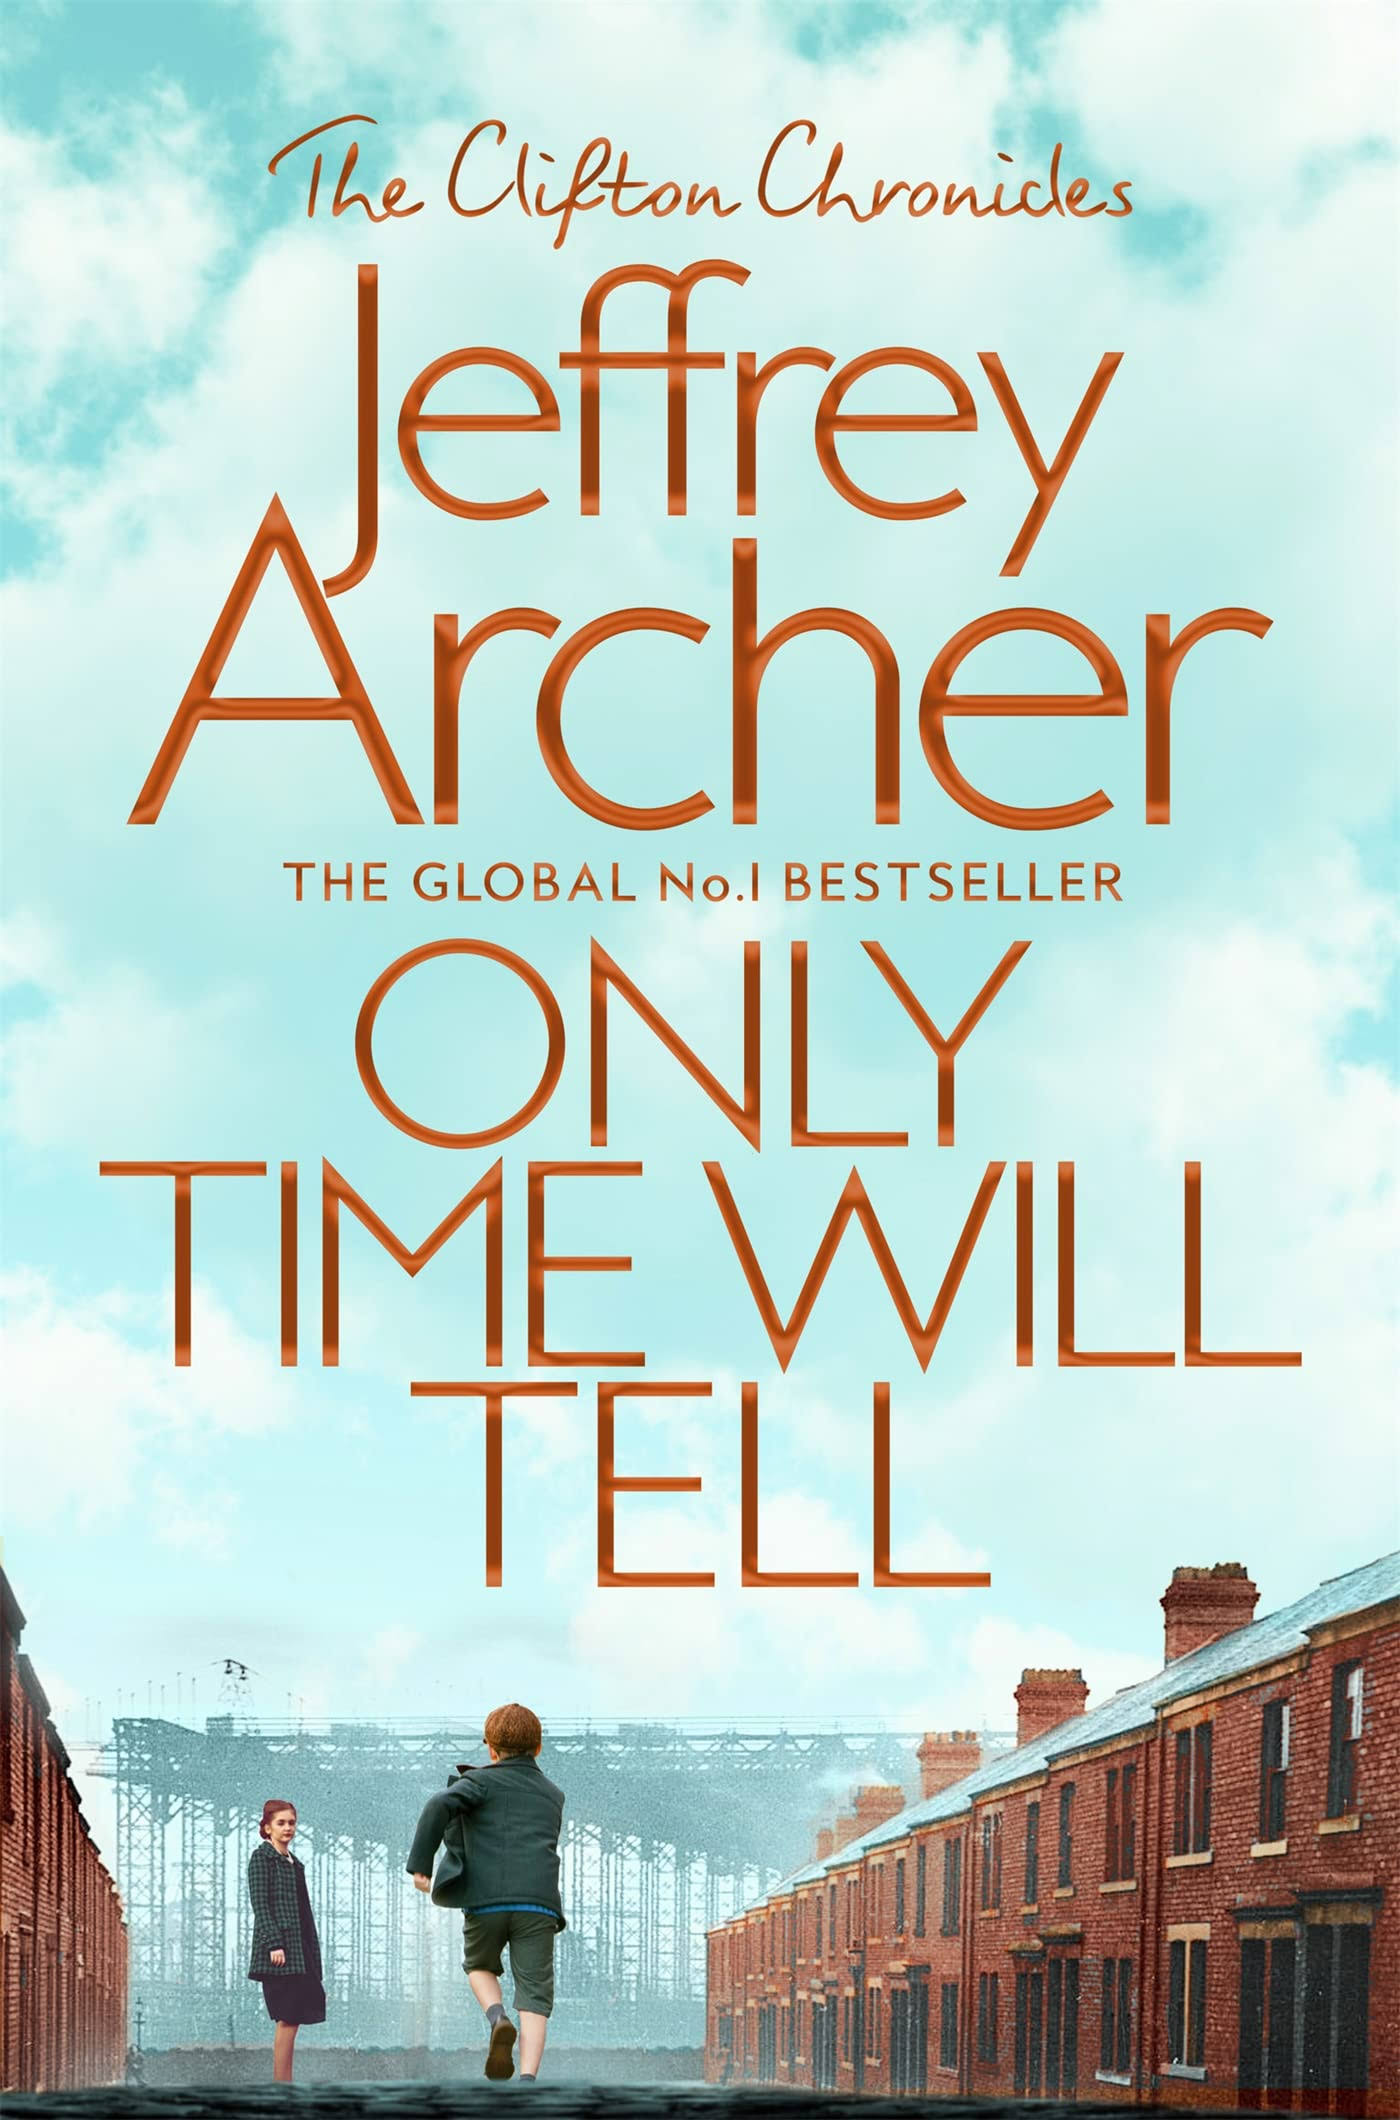 Clifton Chronicles 1 Only Time Will Tell by Jeffrey Archer